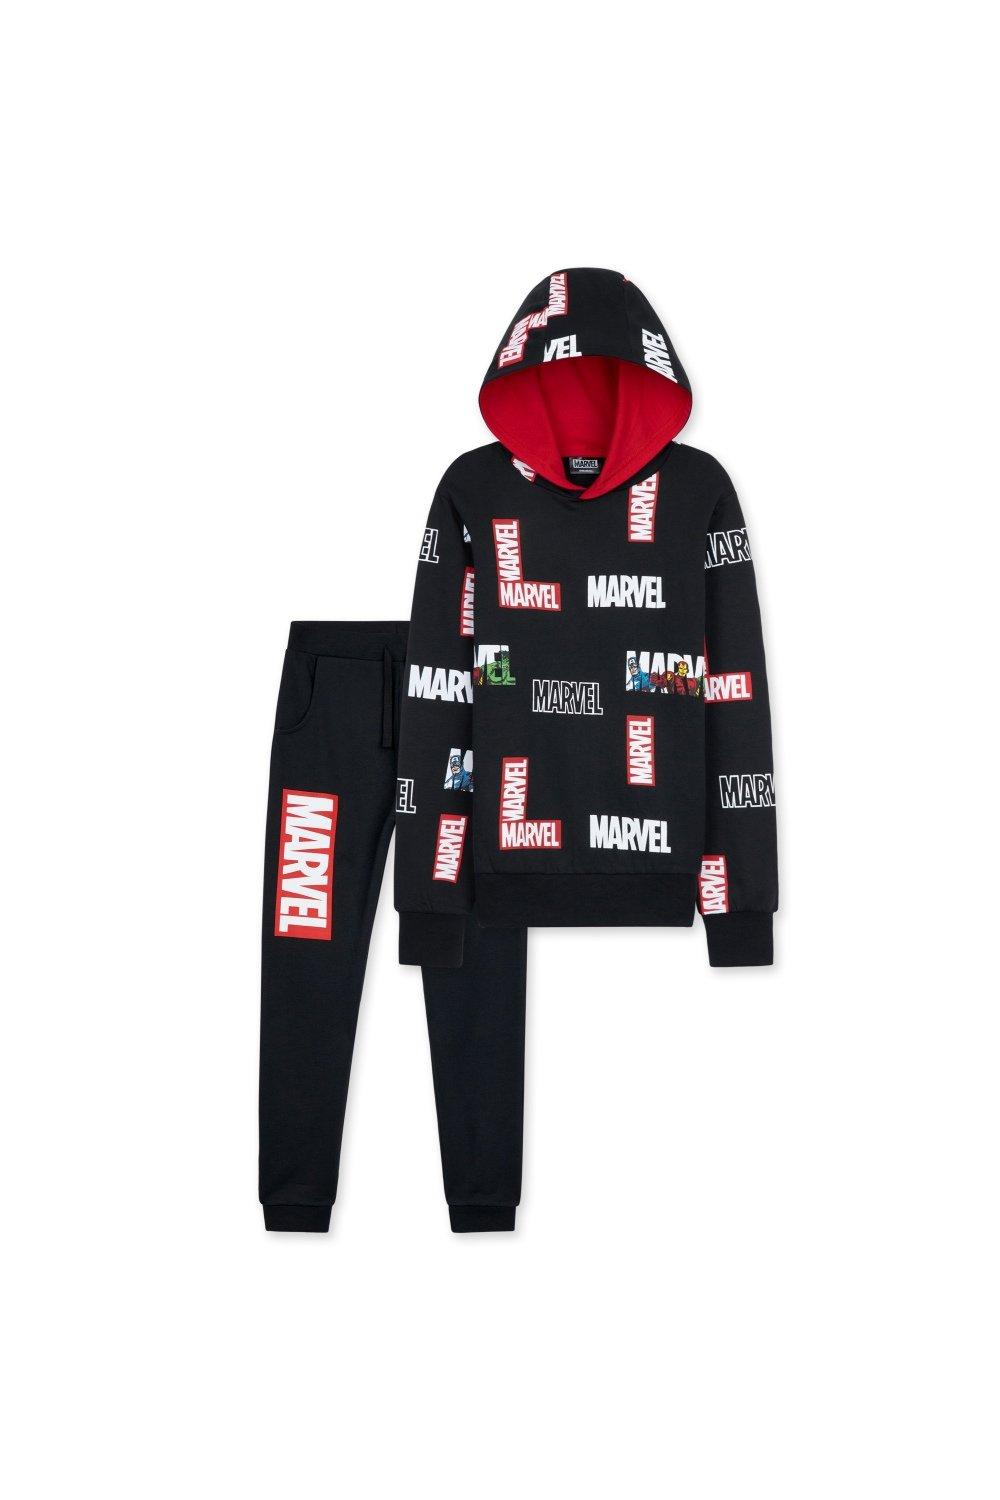 Tracksuit Set - Over The Head Hoodie and Joggers